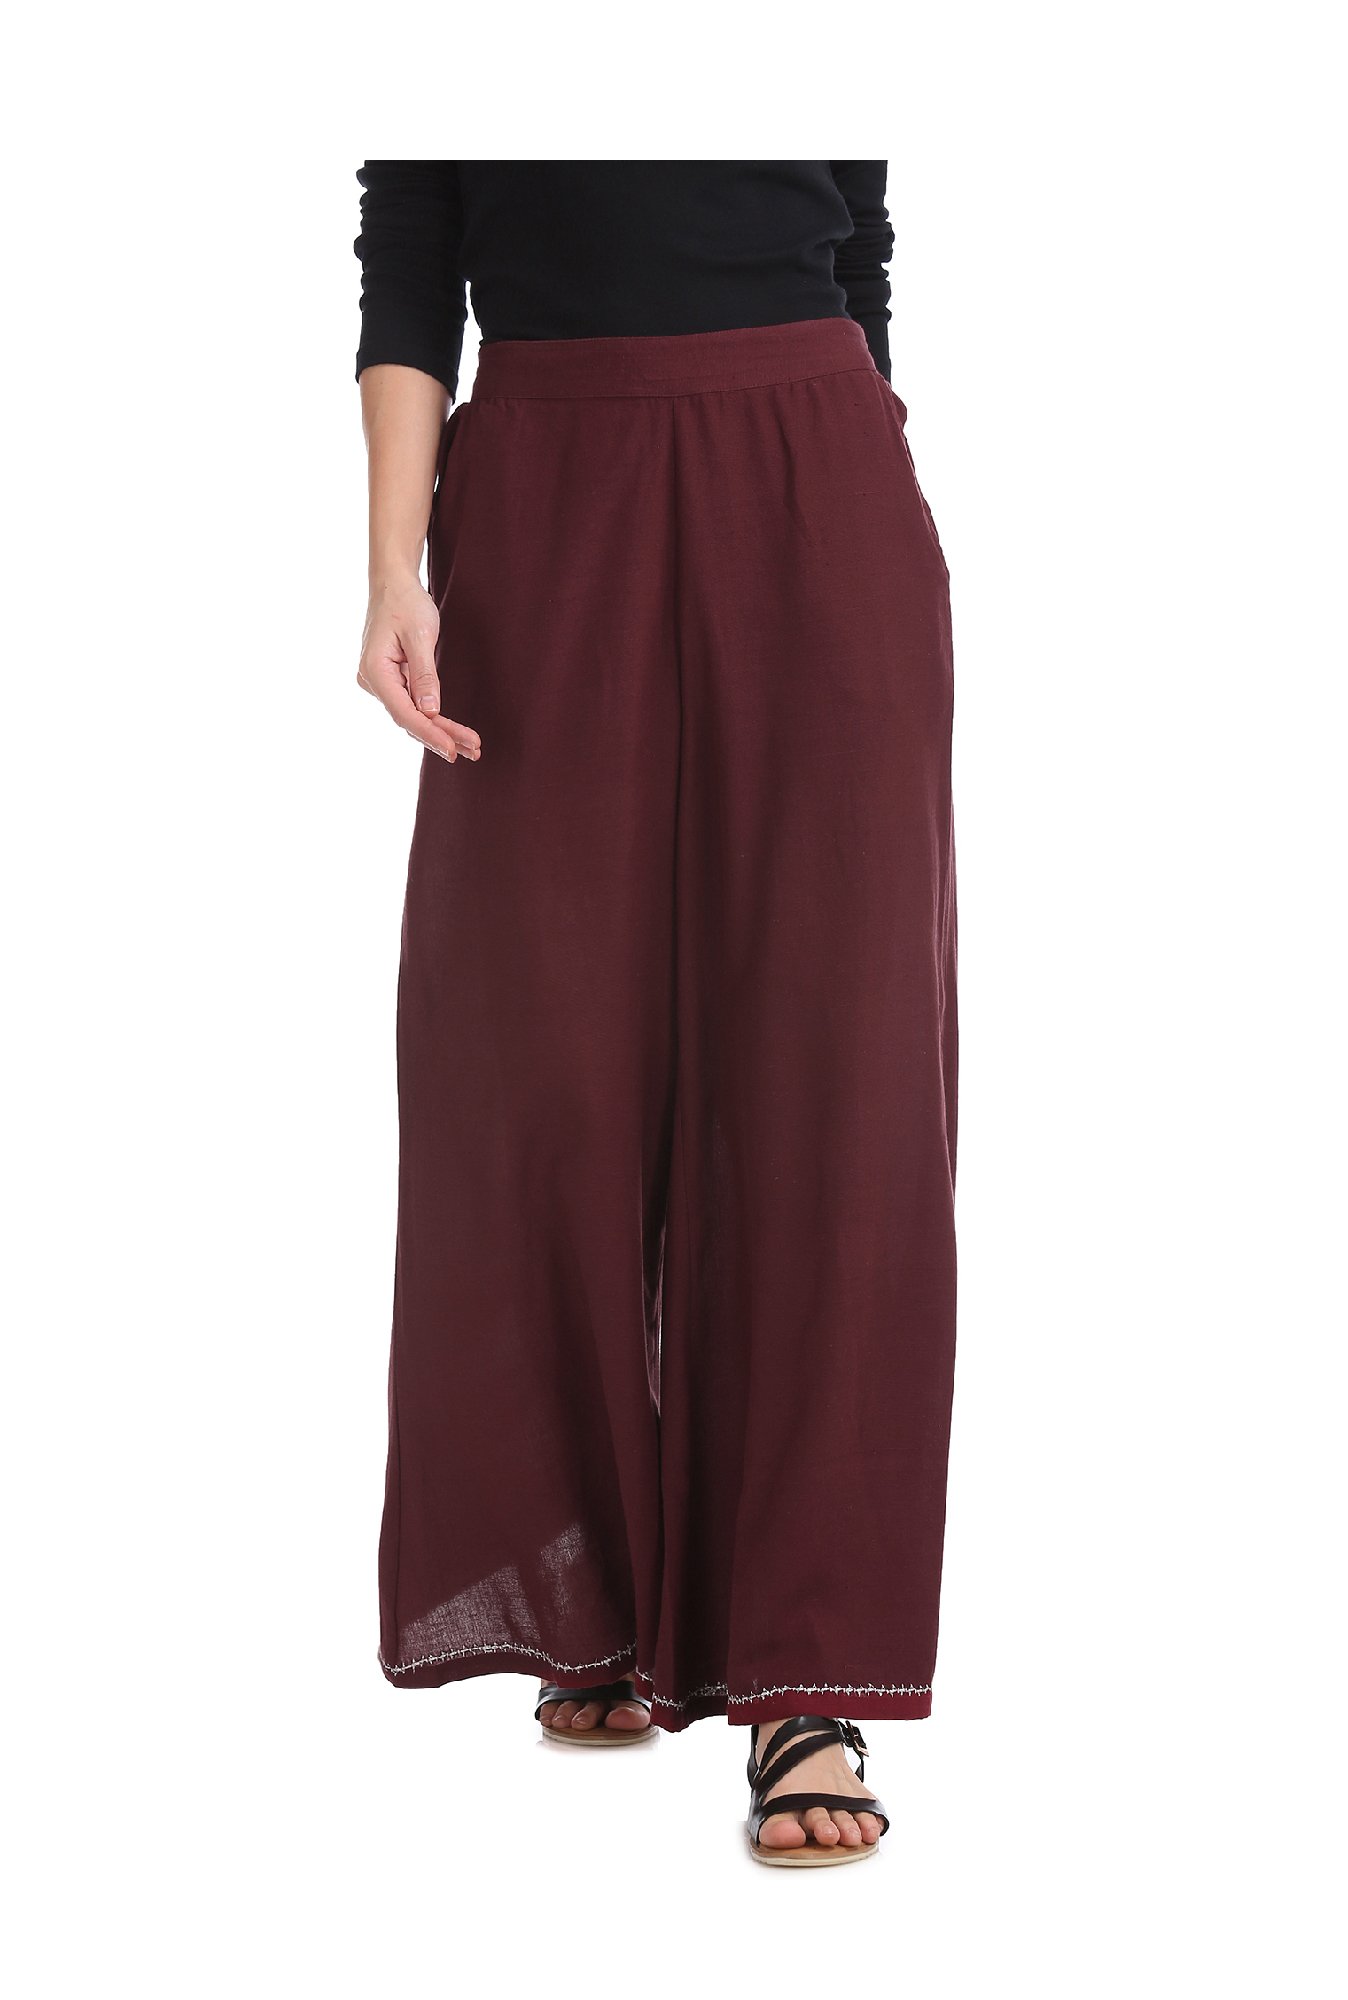 Buy Red Solid Winter Palazzos Online  W for Woman